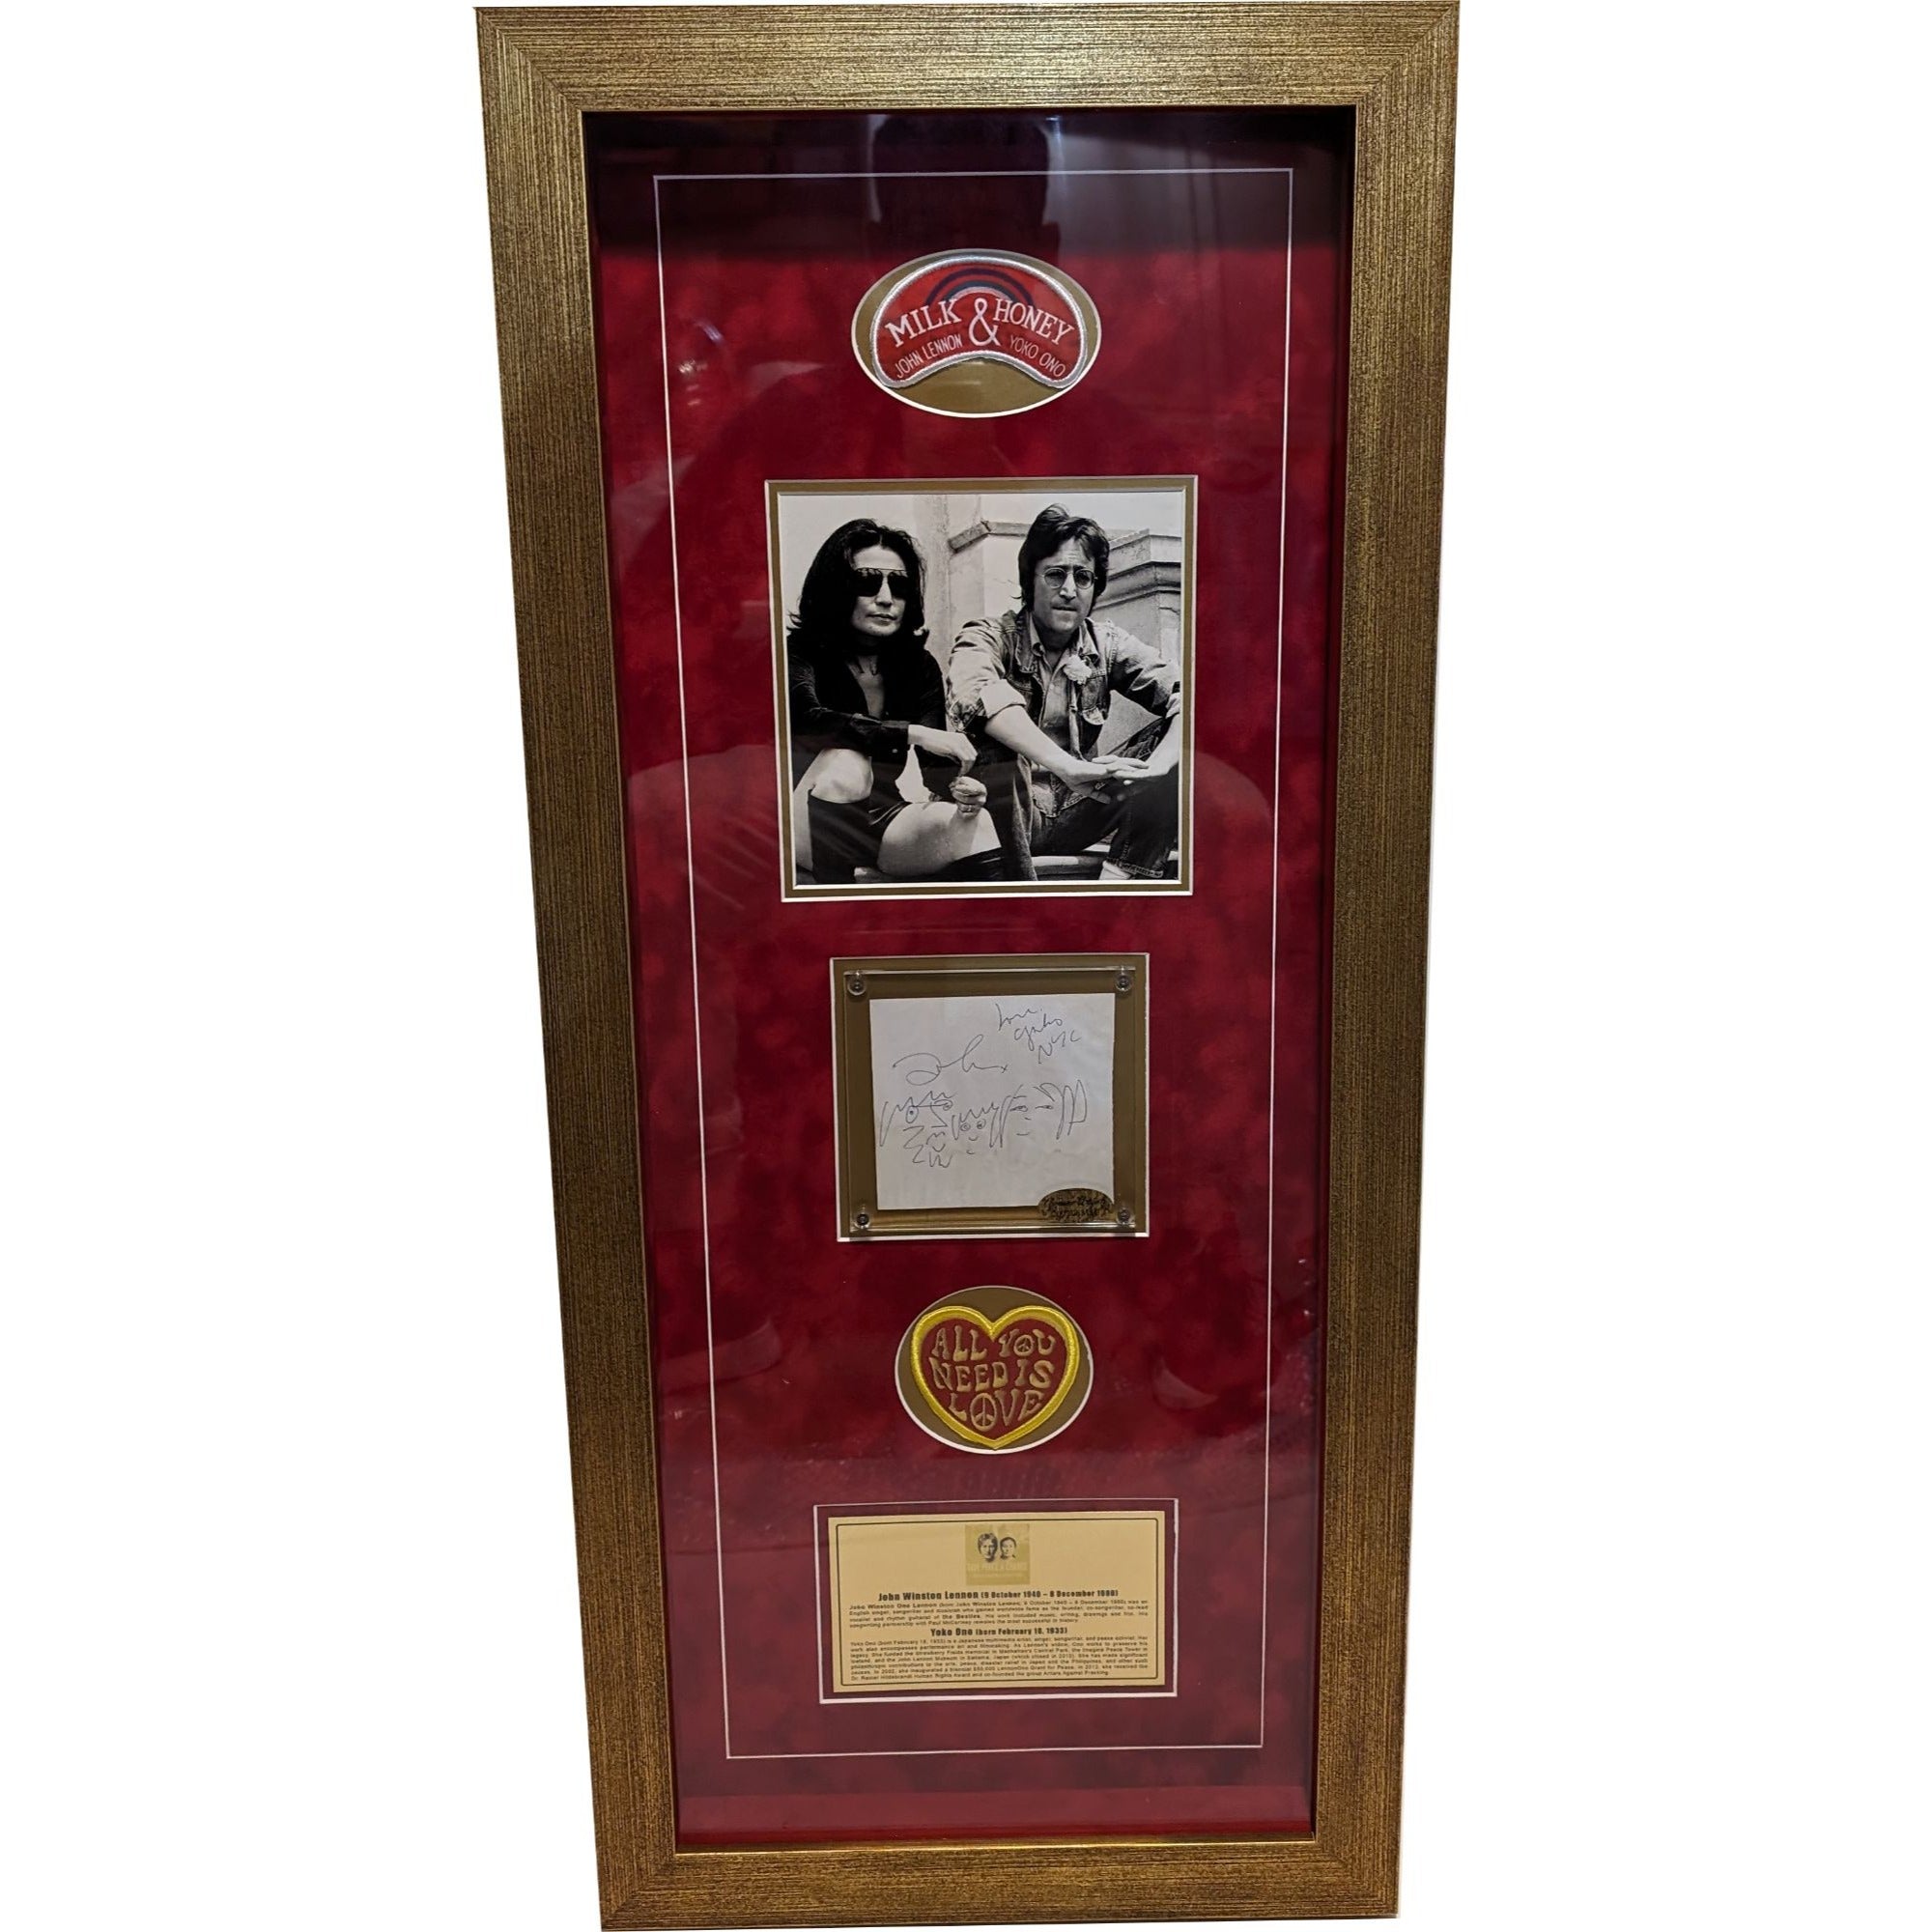 John Lennon & Yoko Ono autograph page book signed and framed 37.5 x 16.5 with personal sketch